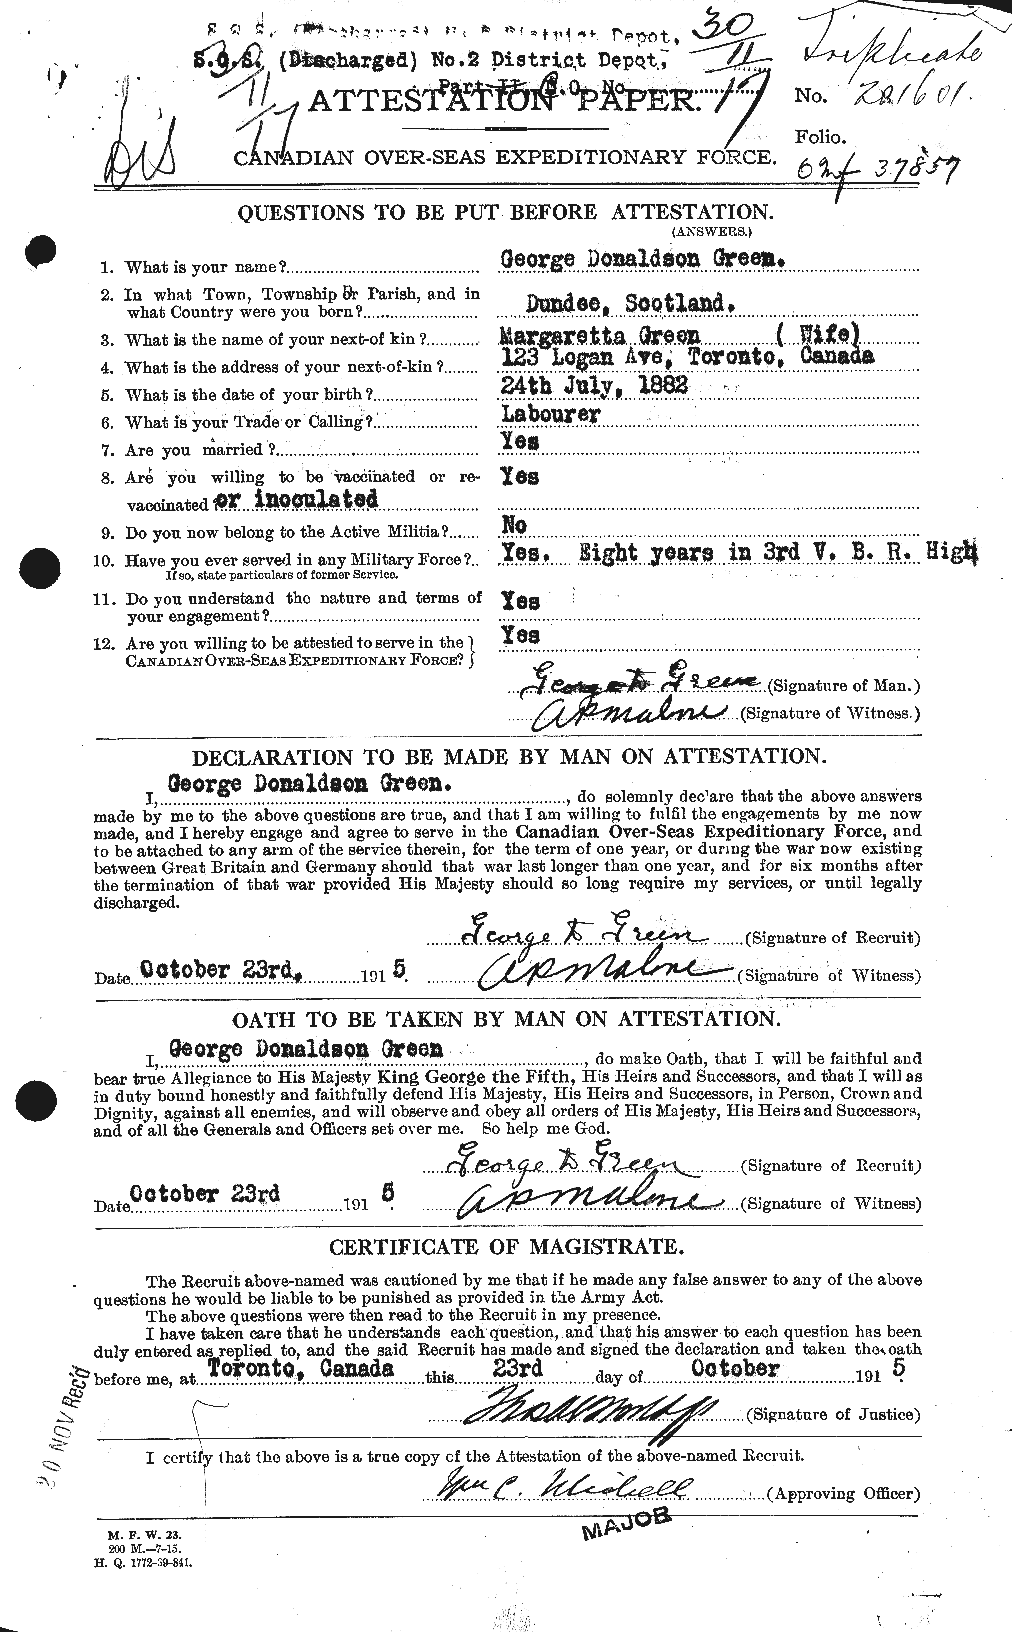 Personnel Records of the First World War - CEF 362167a